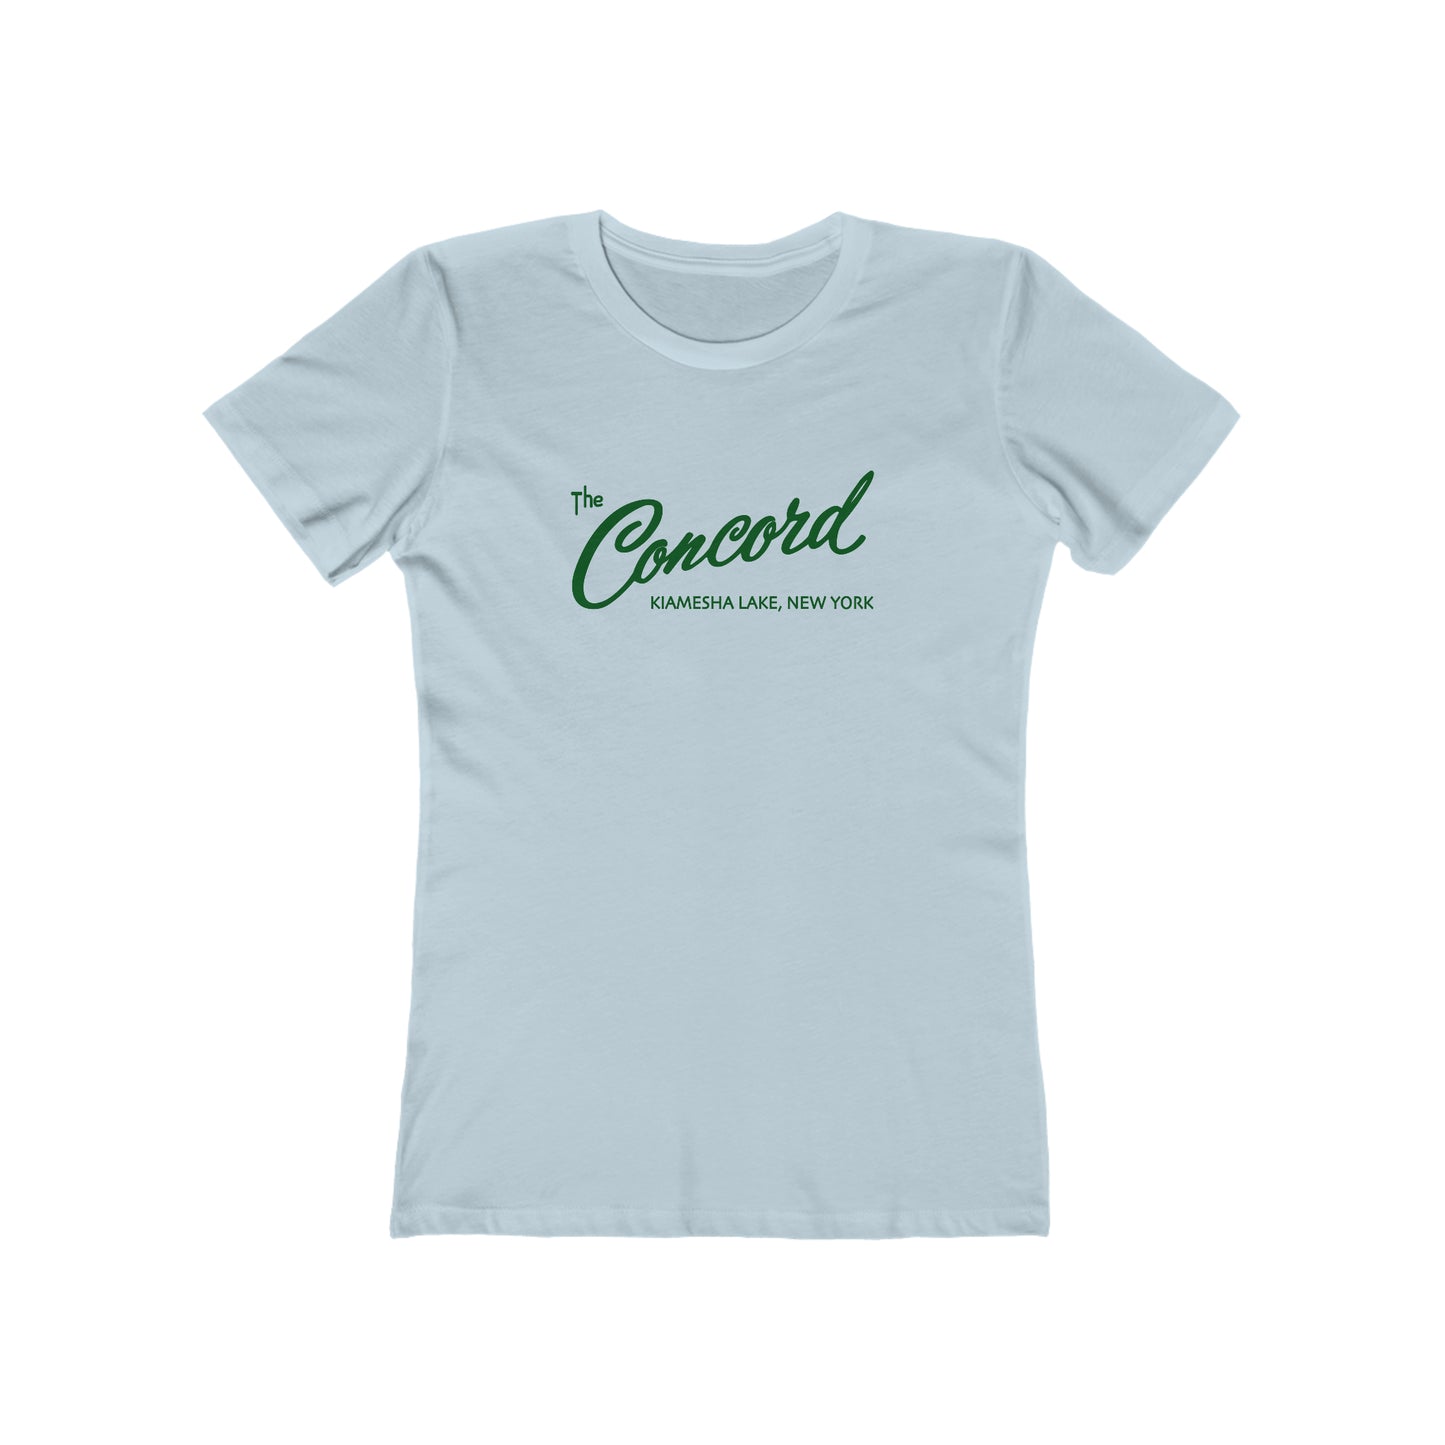 The Concord - Women's T-Shirt